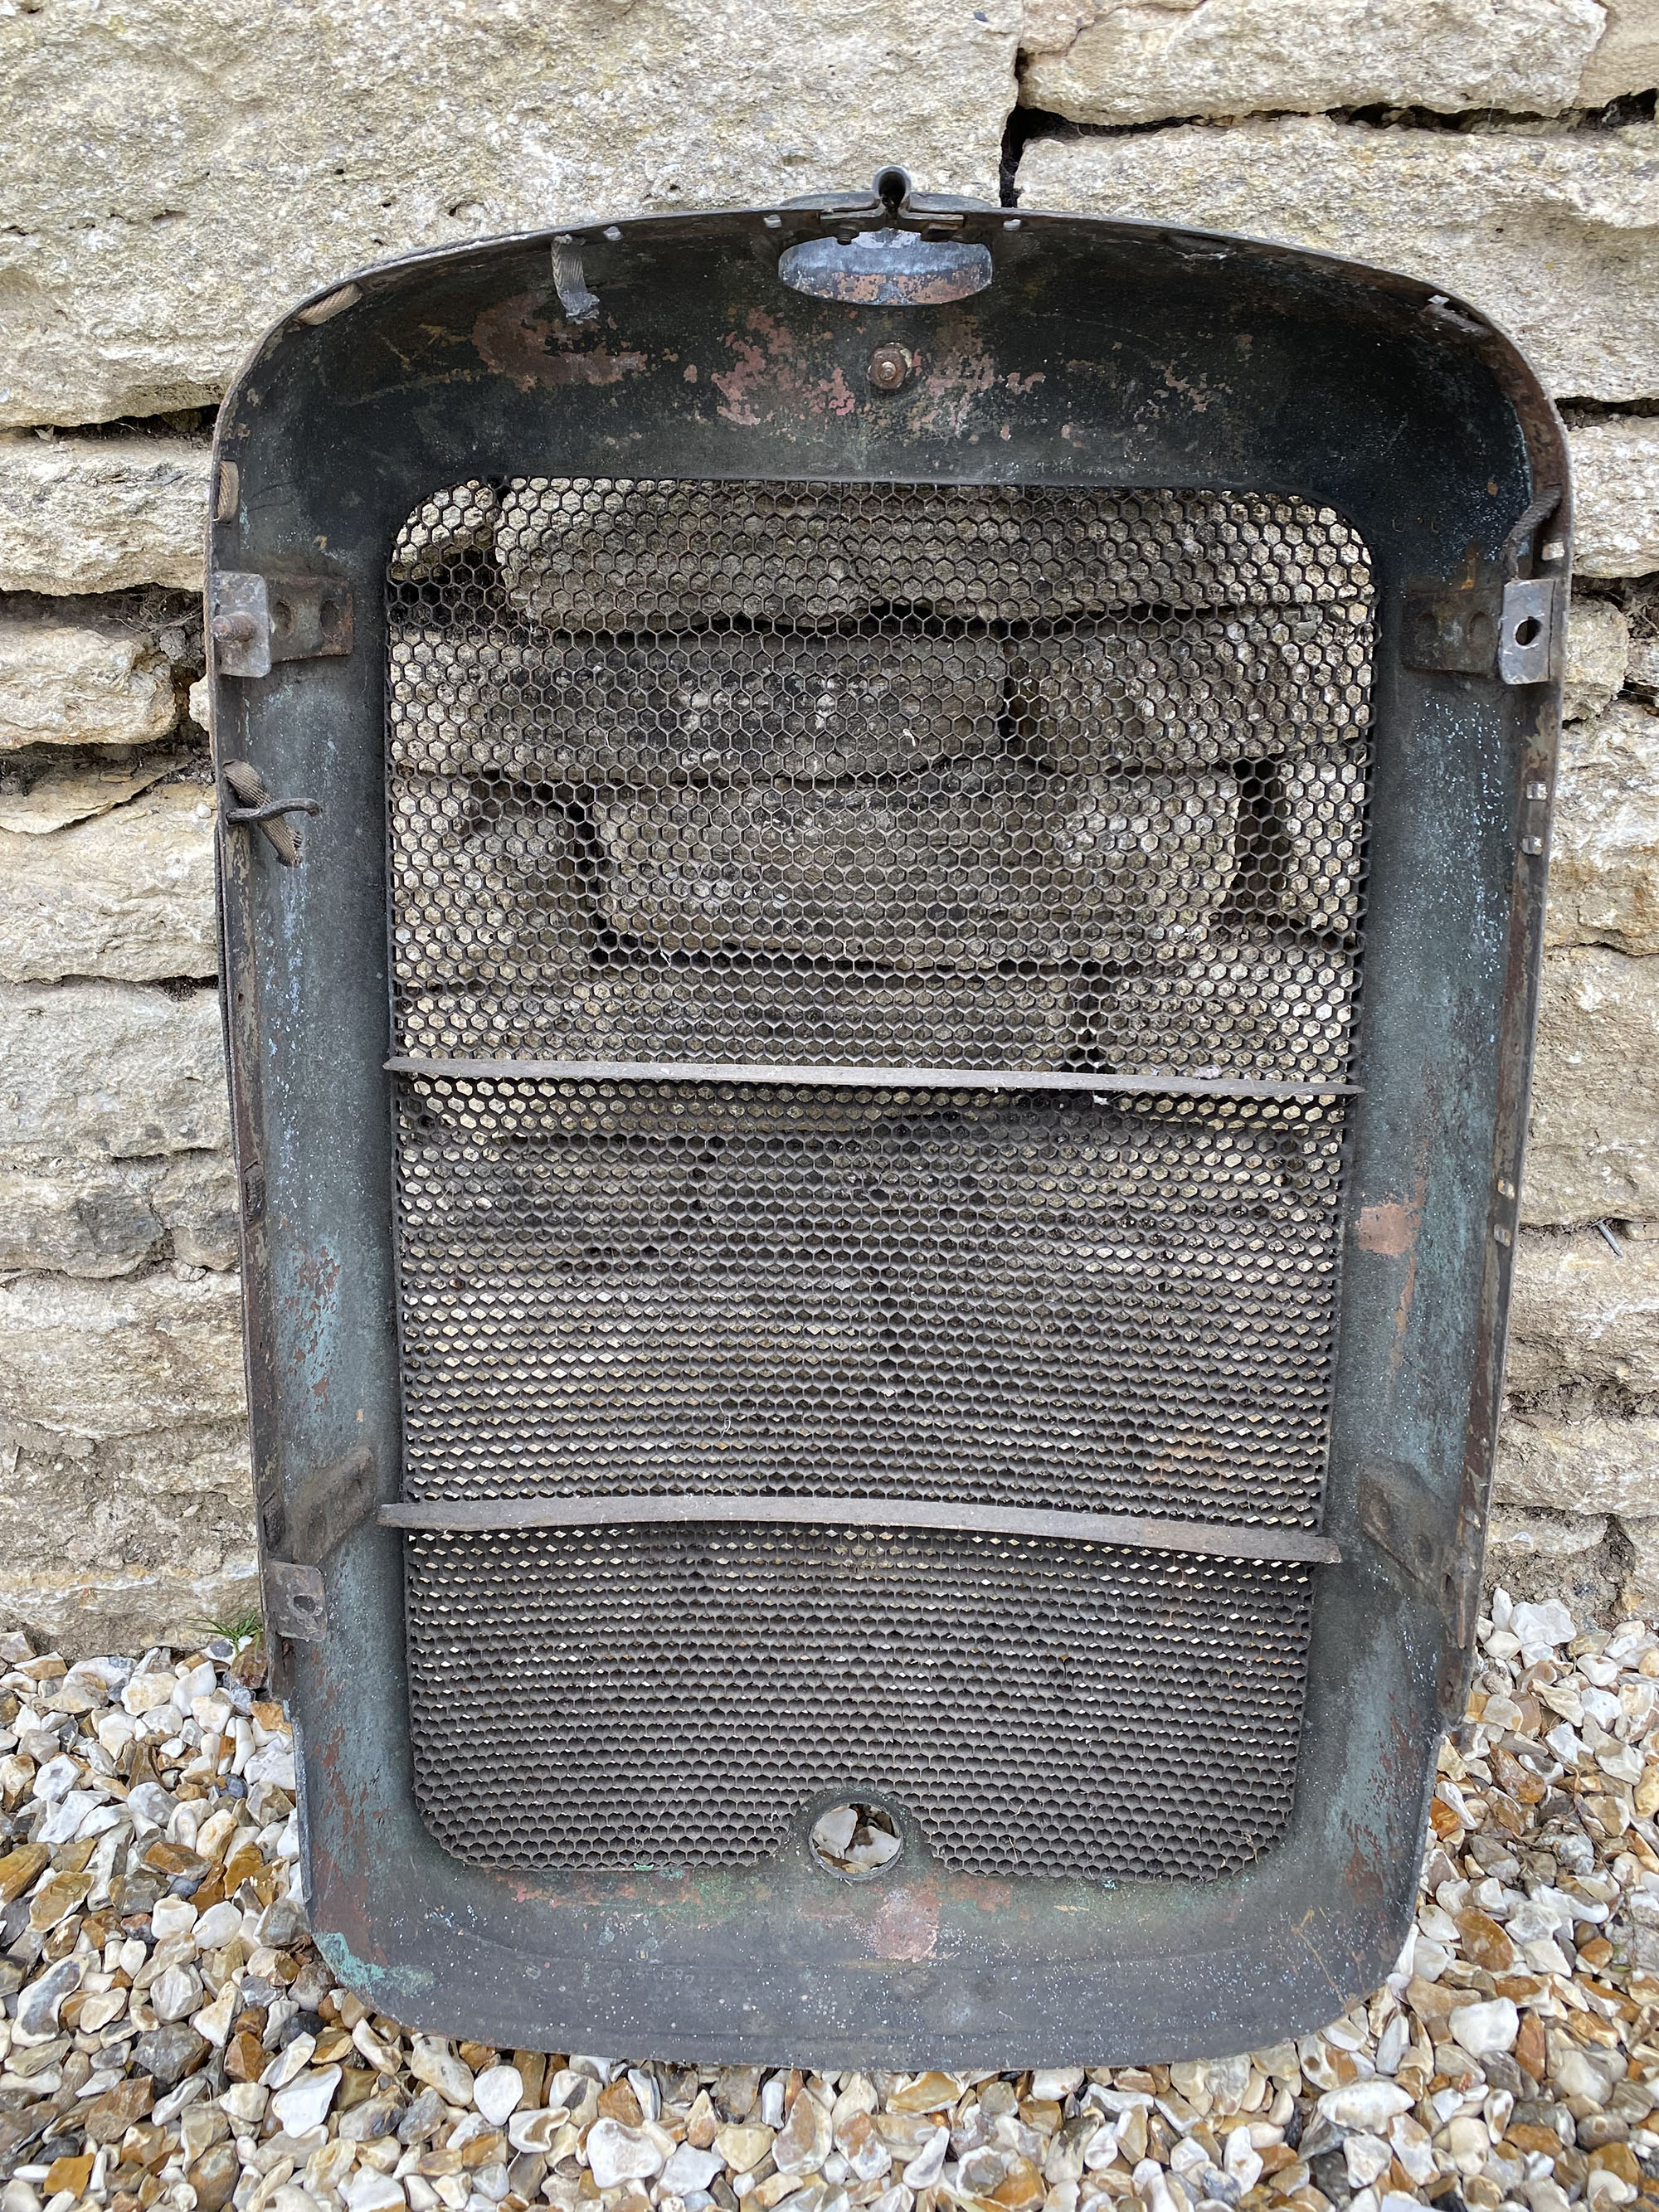 An Alvis Firefly radiator front. - Image 3 of 3